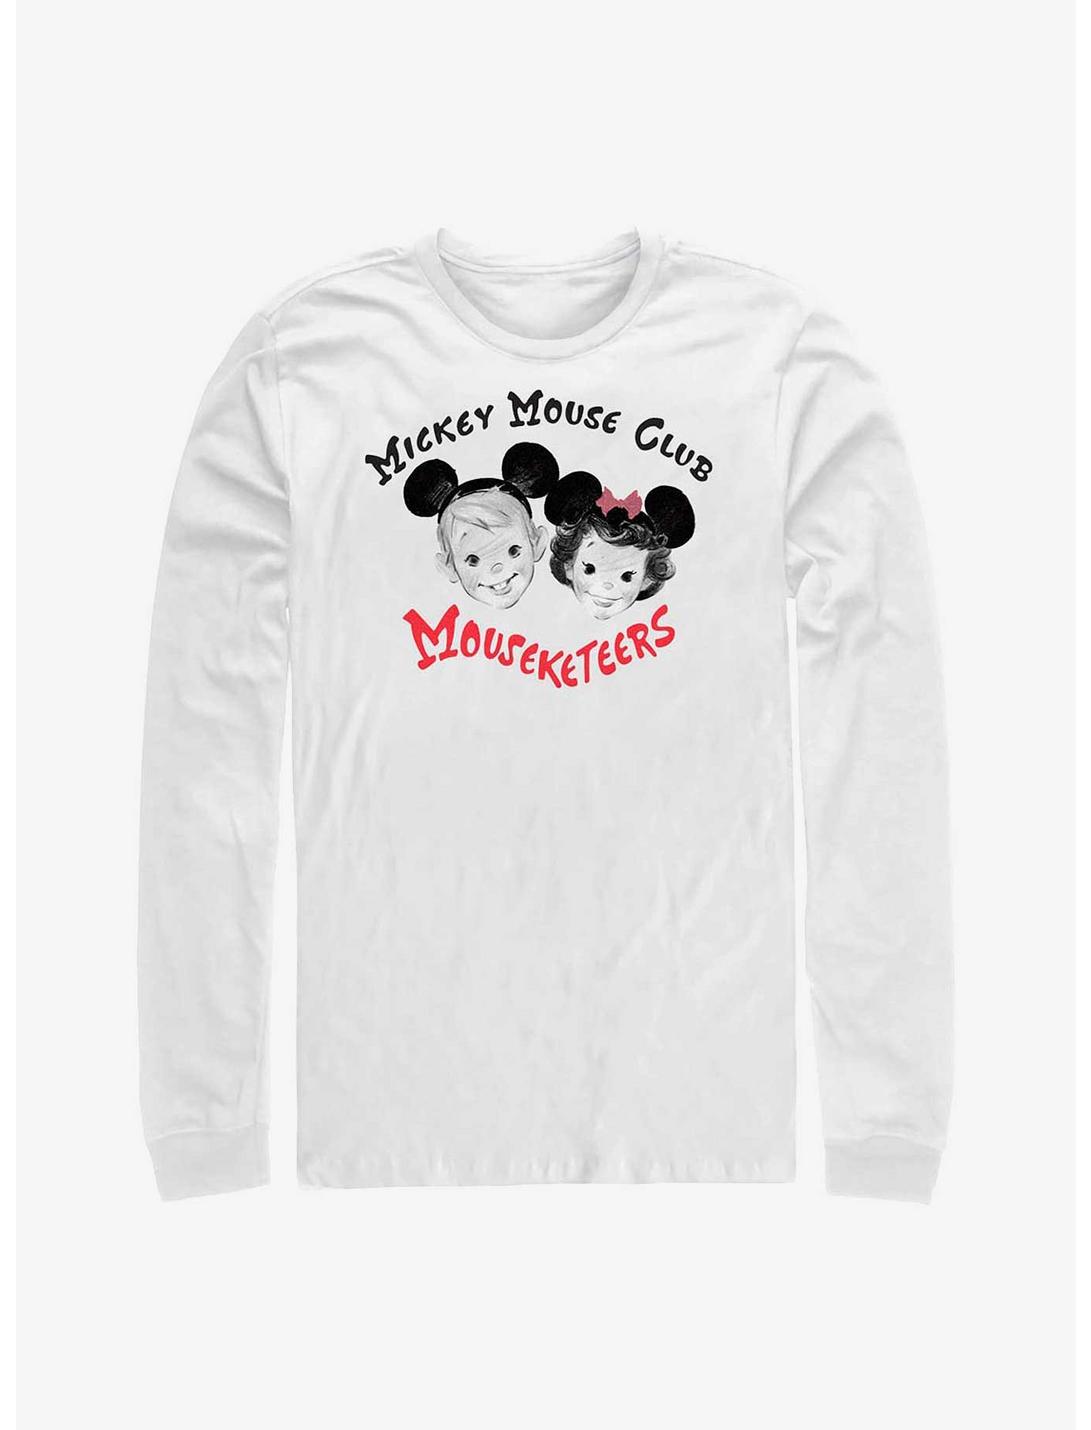 Disney100 Mickey Mouse Mouseketeers Club Long-Sleeve T-Shirt, WHITE, hi-res